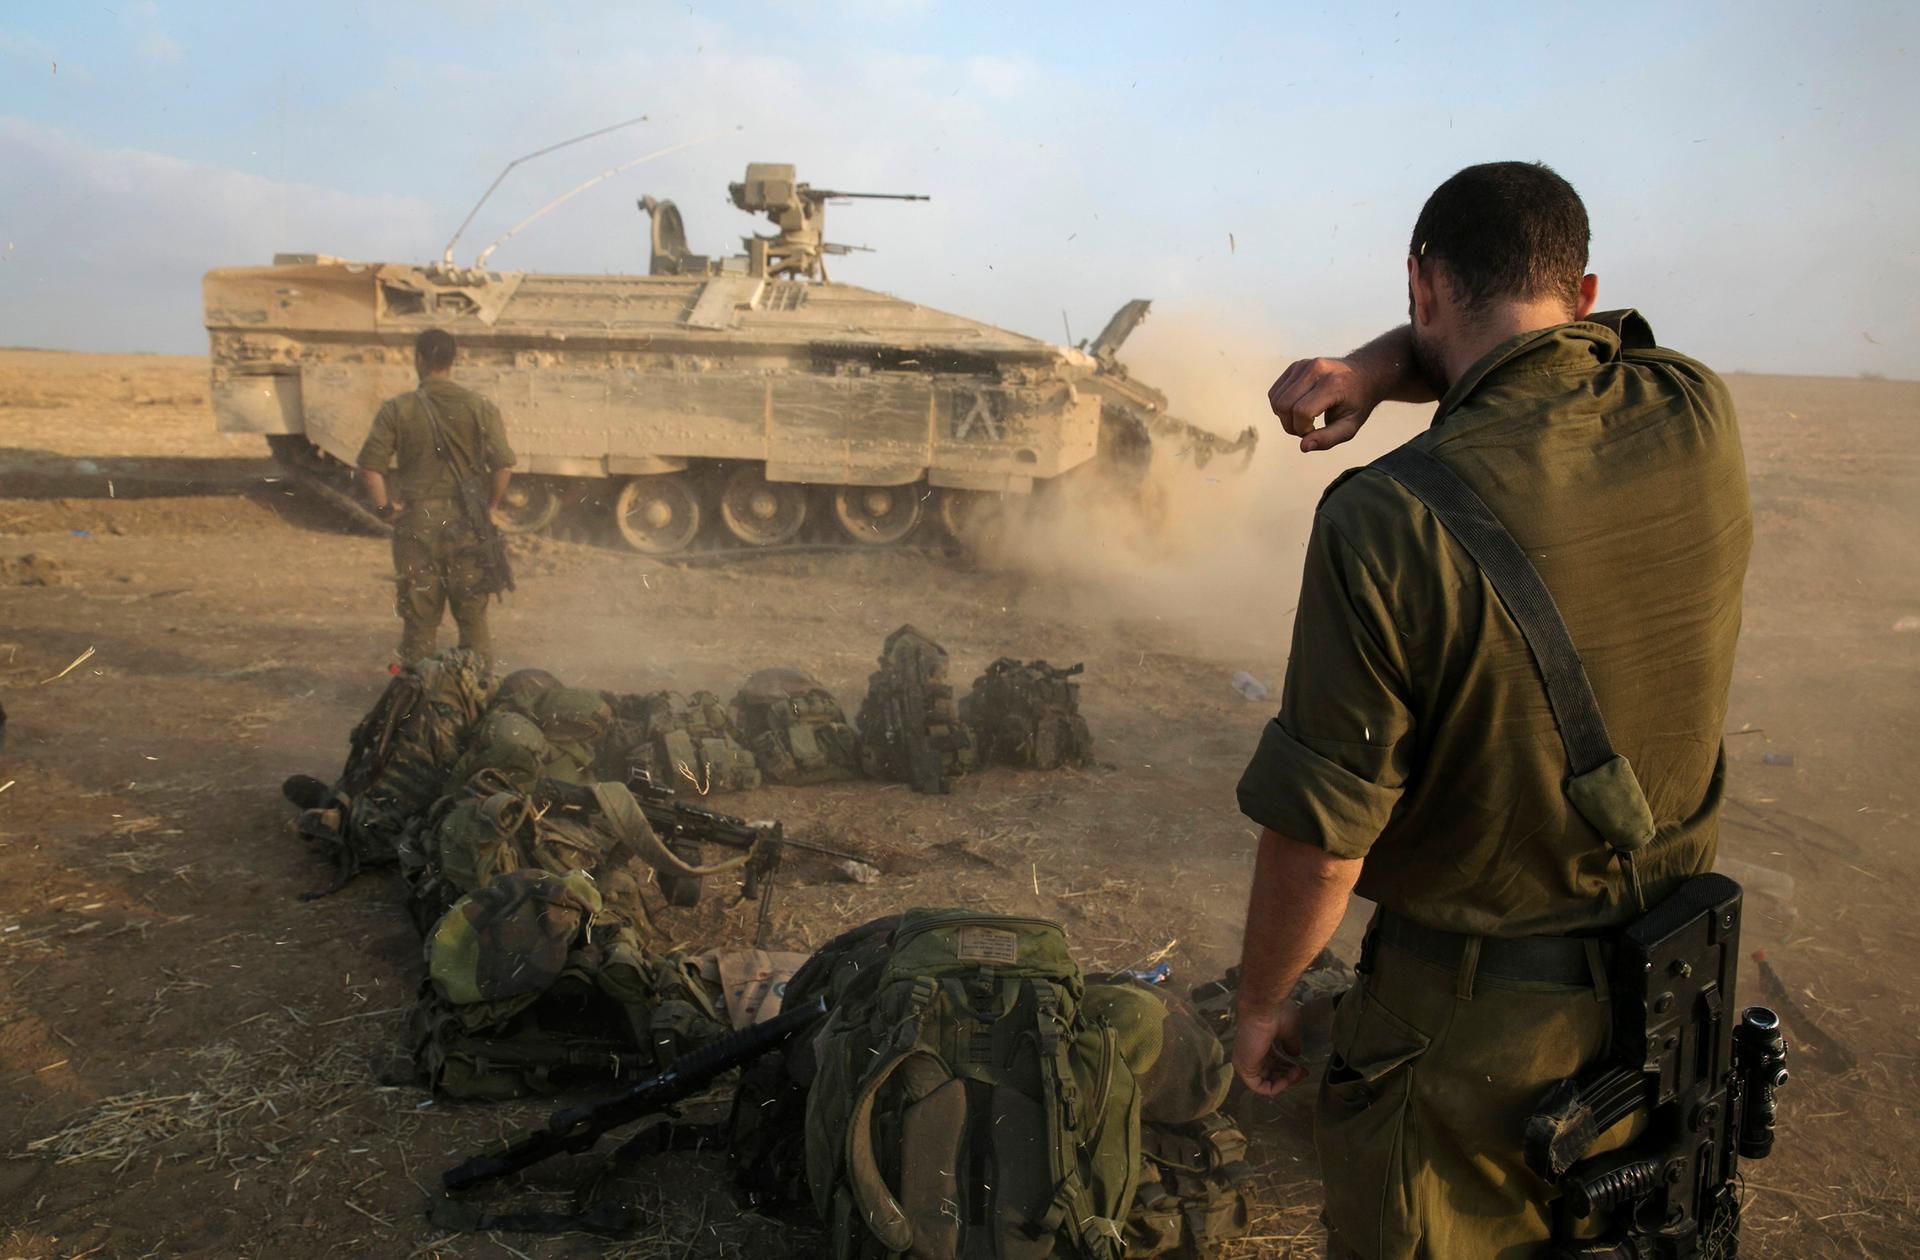 An Israeli soldier stands at a staging area after crossing back into Israel from Gaza on July 28, 2014.